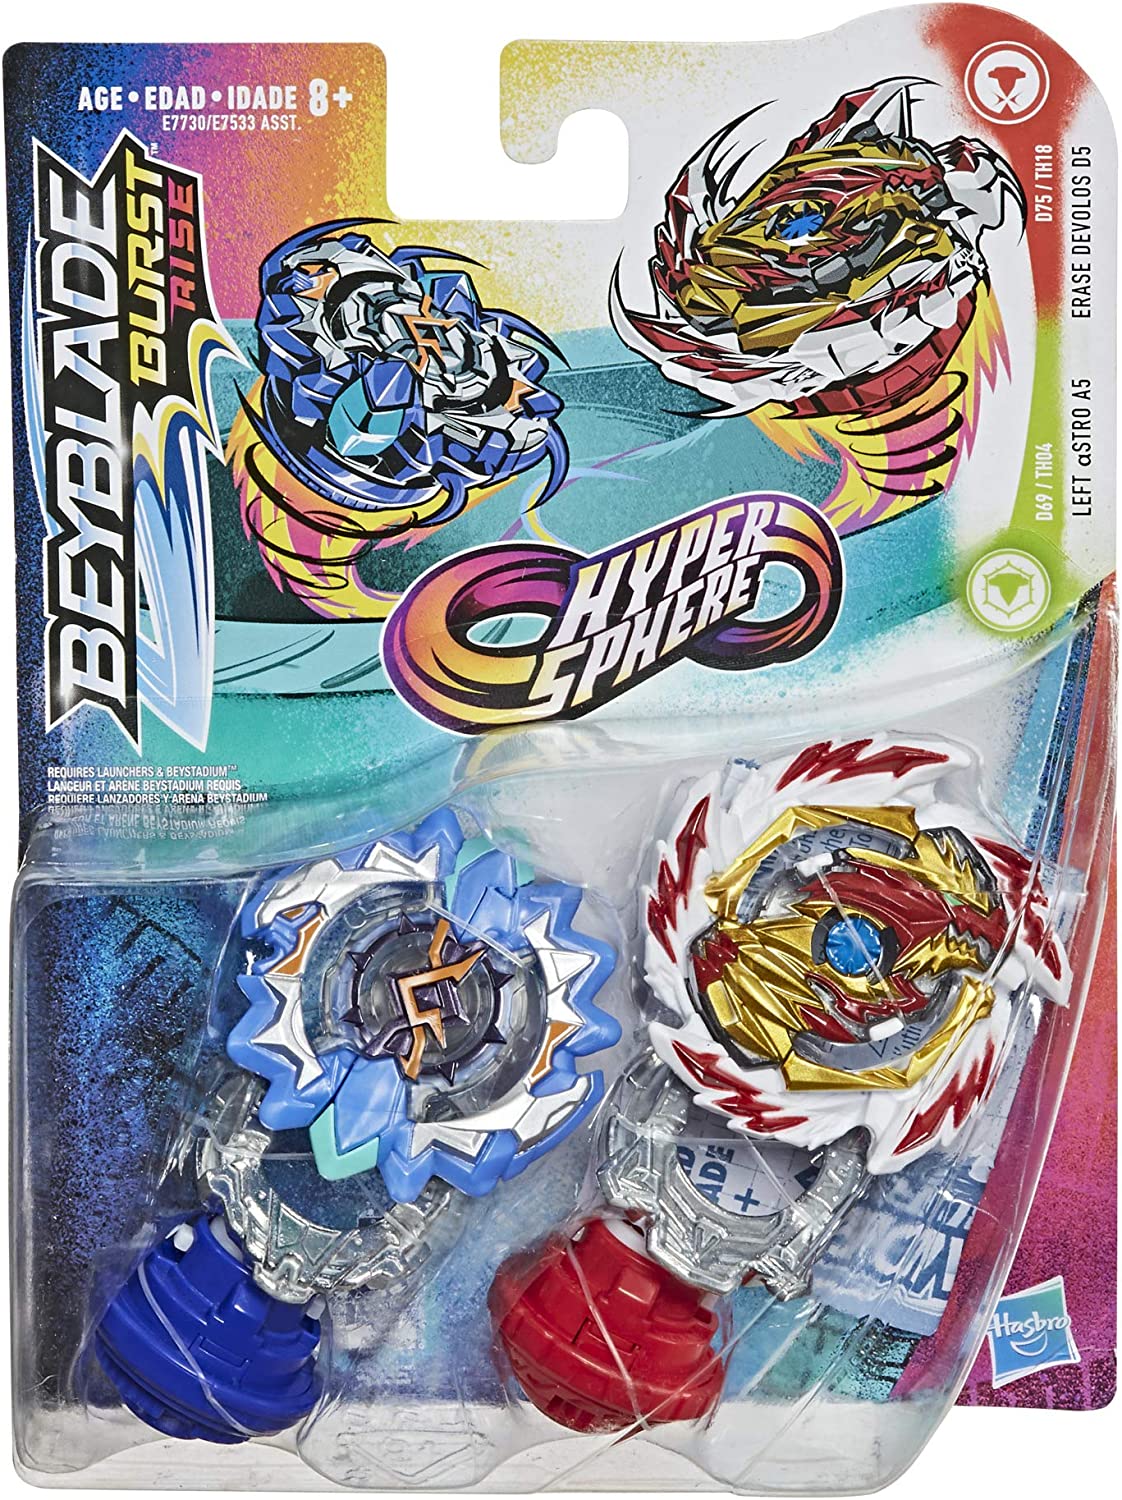 Beyblade Burst Rise Hypersphere Dual Pack Erase Devolos D5 and Left Astro A5 -- 2 Left-Spin Battling Top Toys, Ages 8 and Up